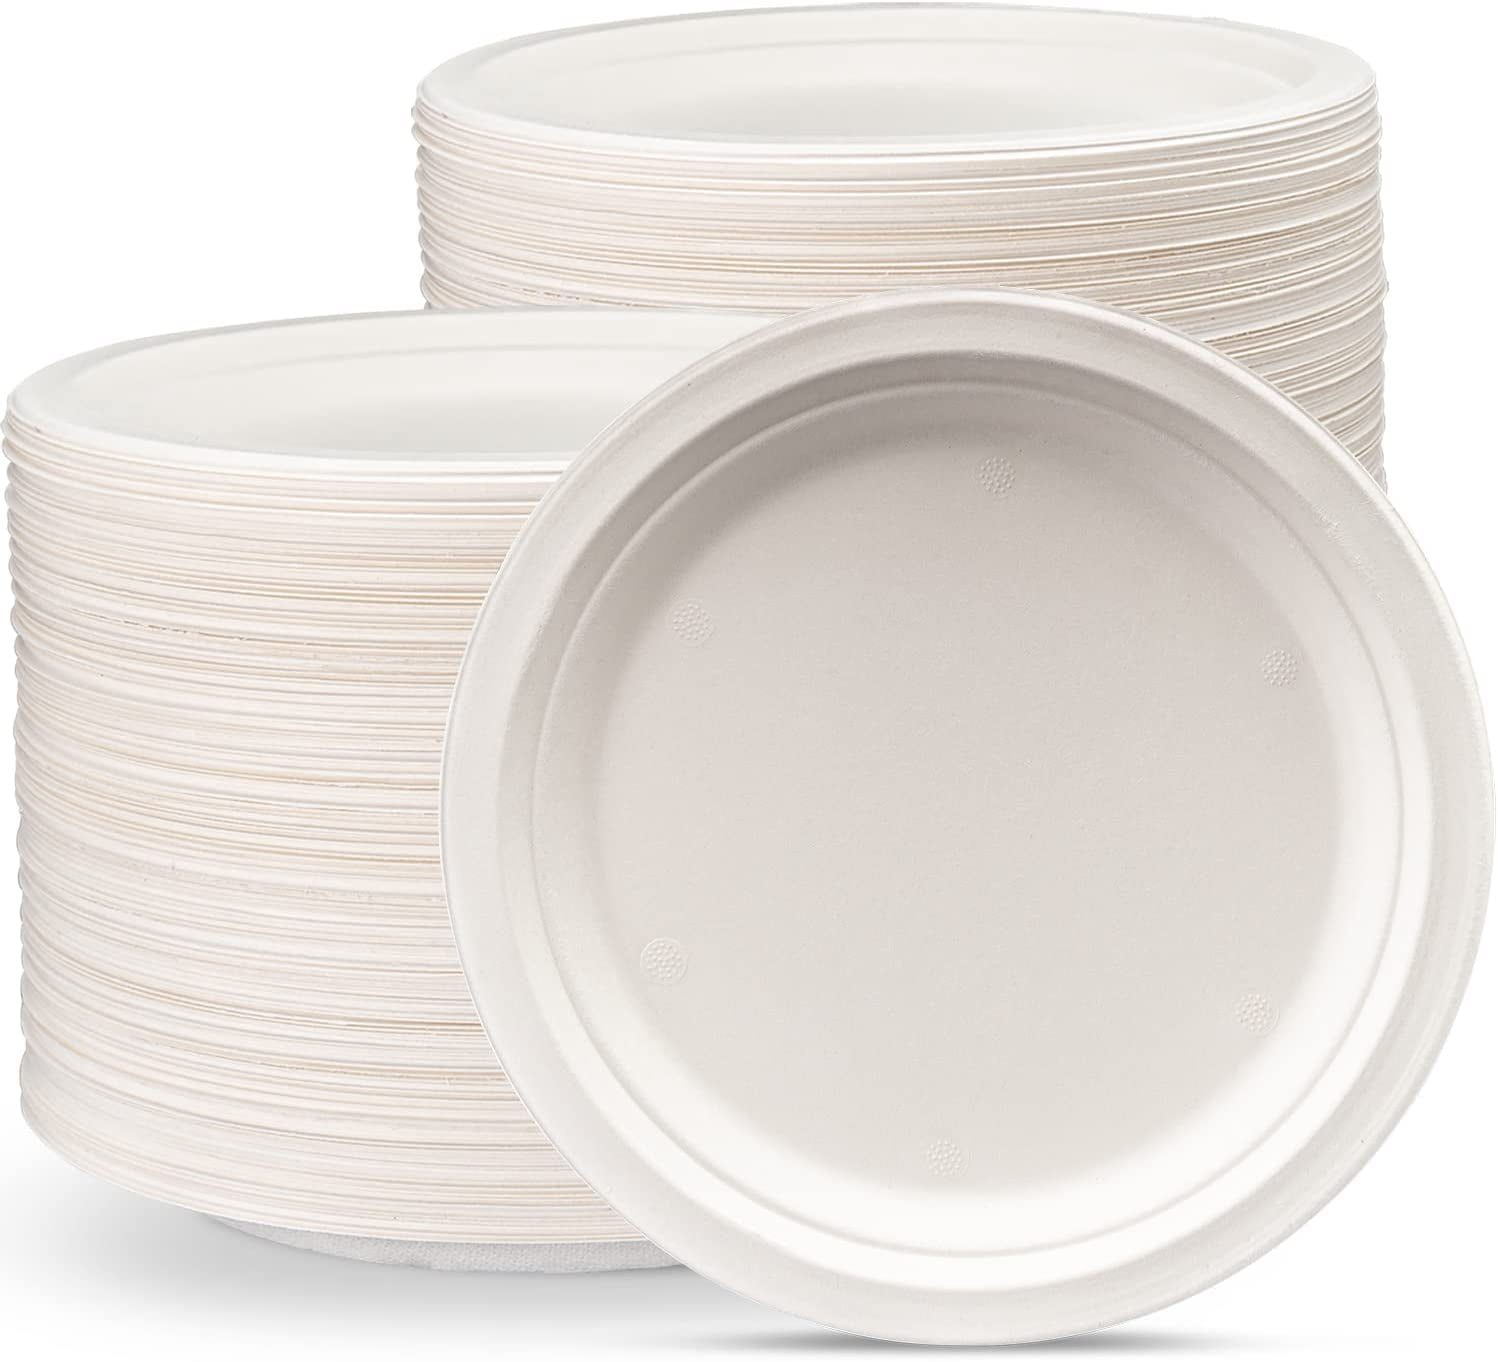 Comfy Package 100% Compostable 9 Inch Heavy-Duty Plates [125 Pack]  Eco-Friendly Disposable Sugarcane Paper Plates